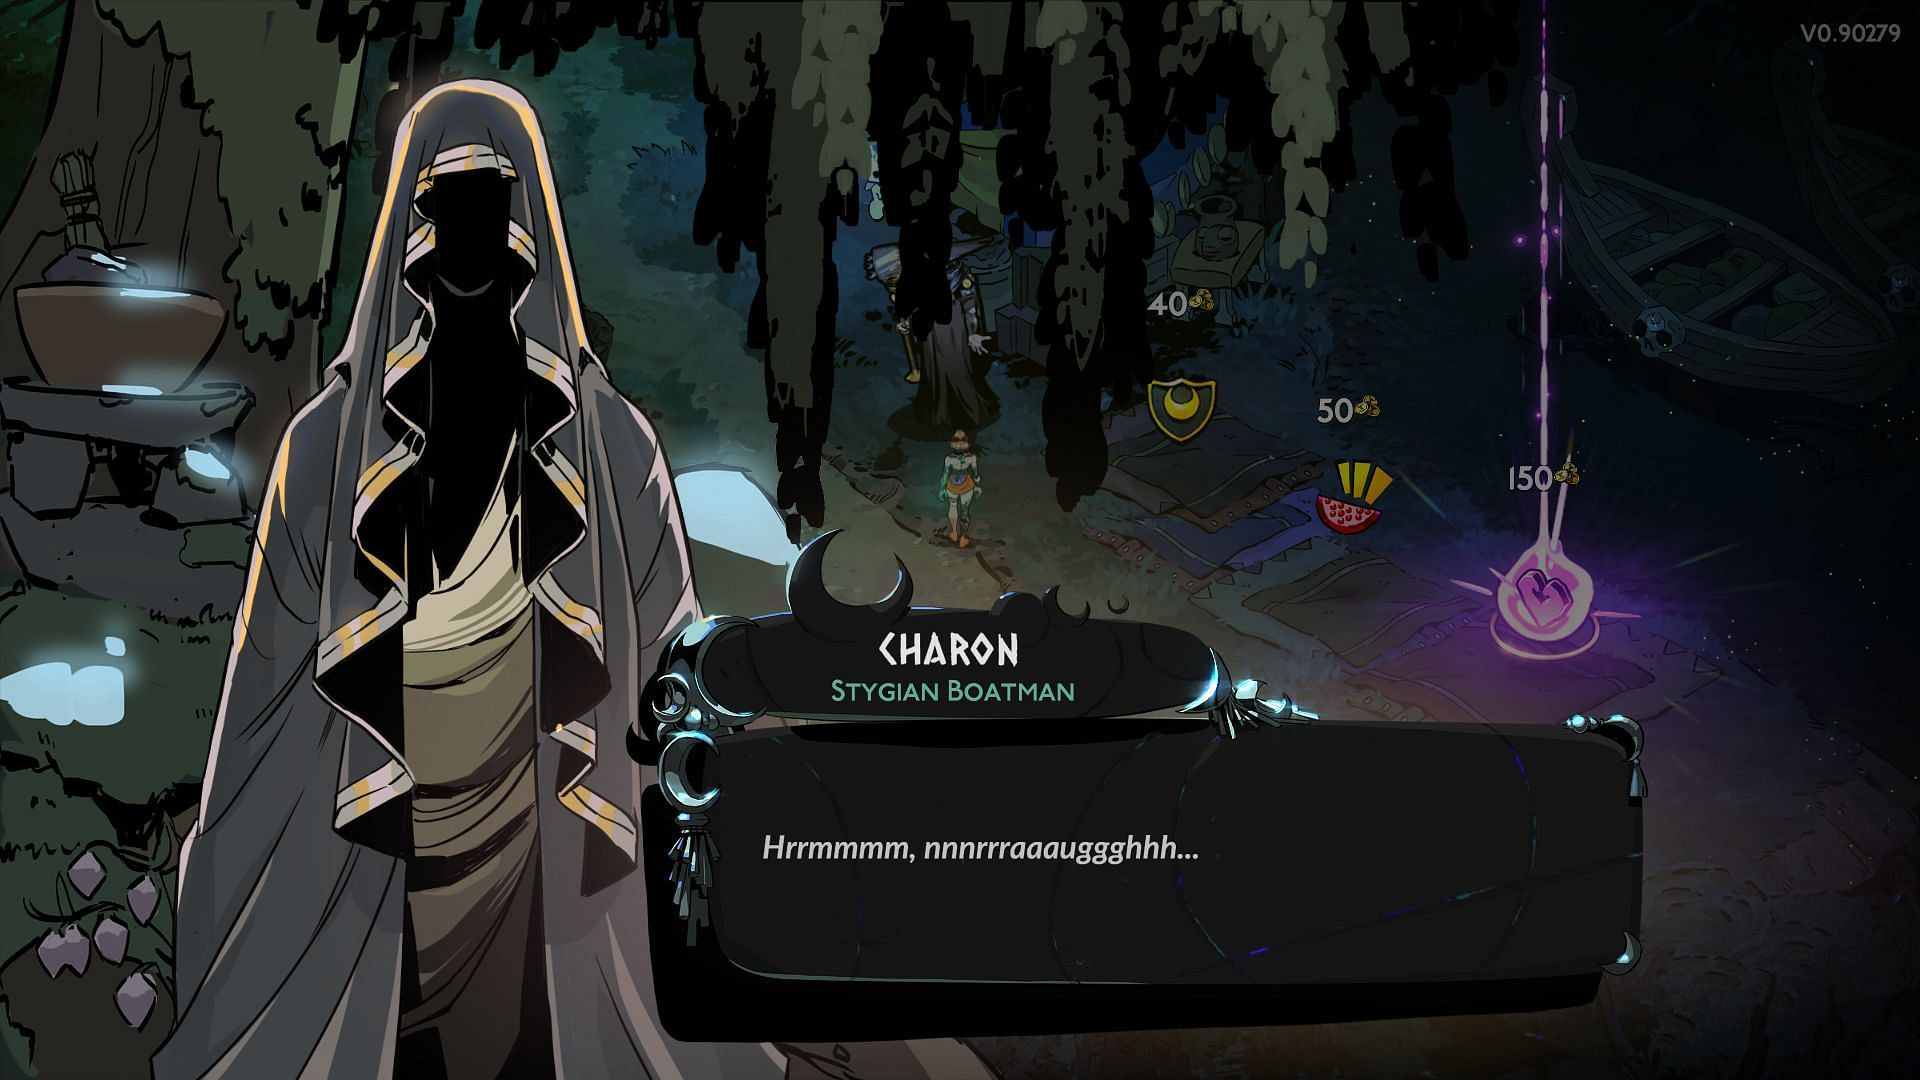 Charon sometimes offers Nectar (Image via Supergiant Games)